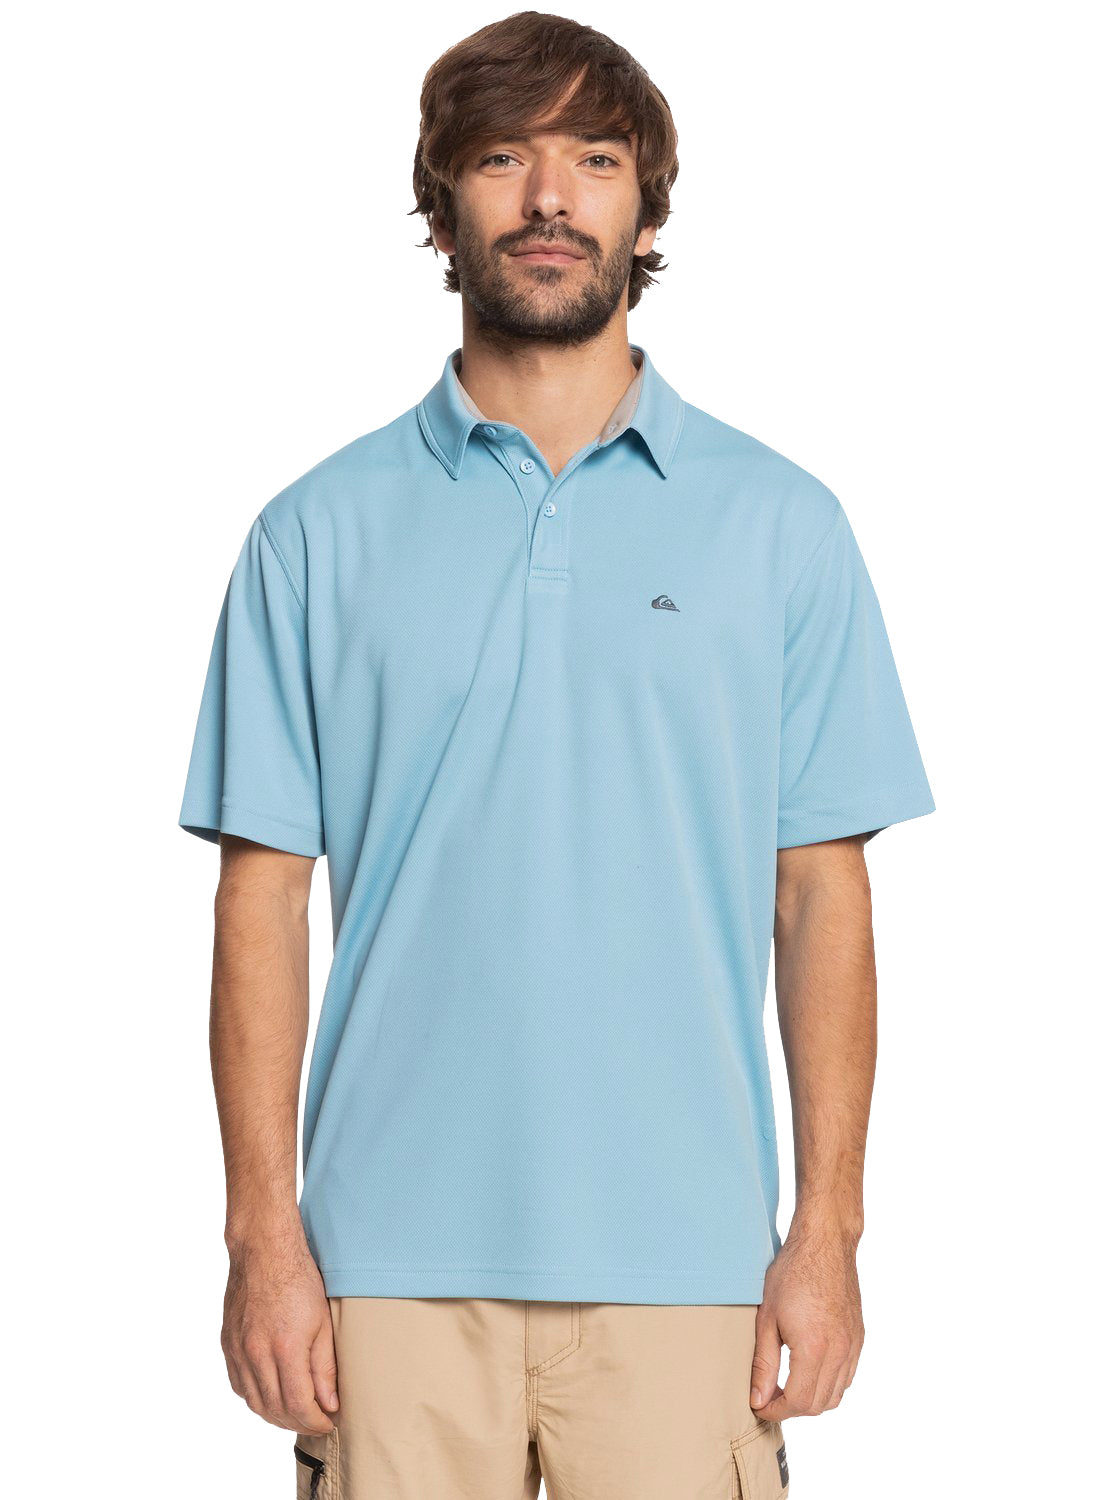 Quiksilver Waterman Water 2 Polo BHC0 L